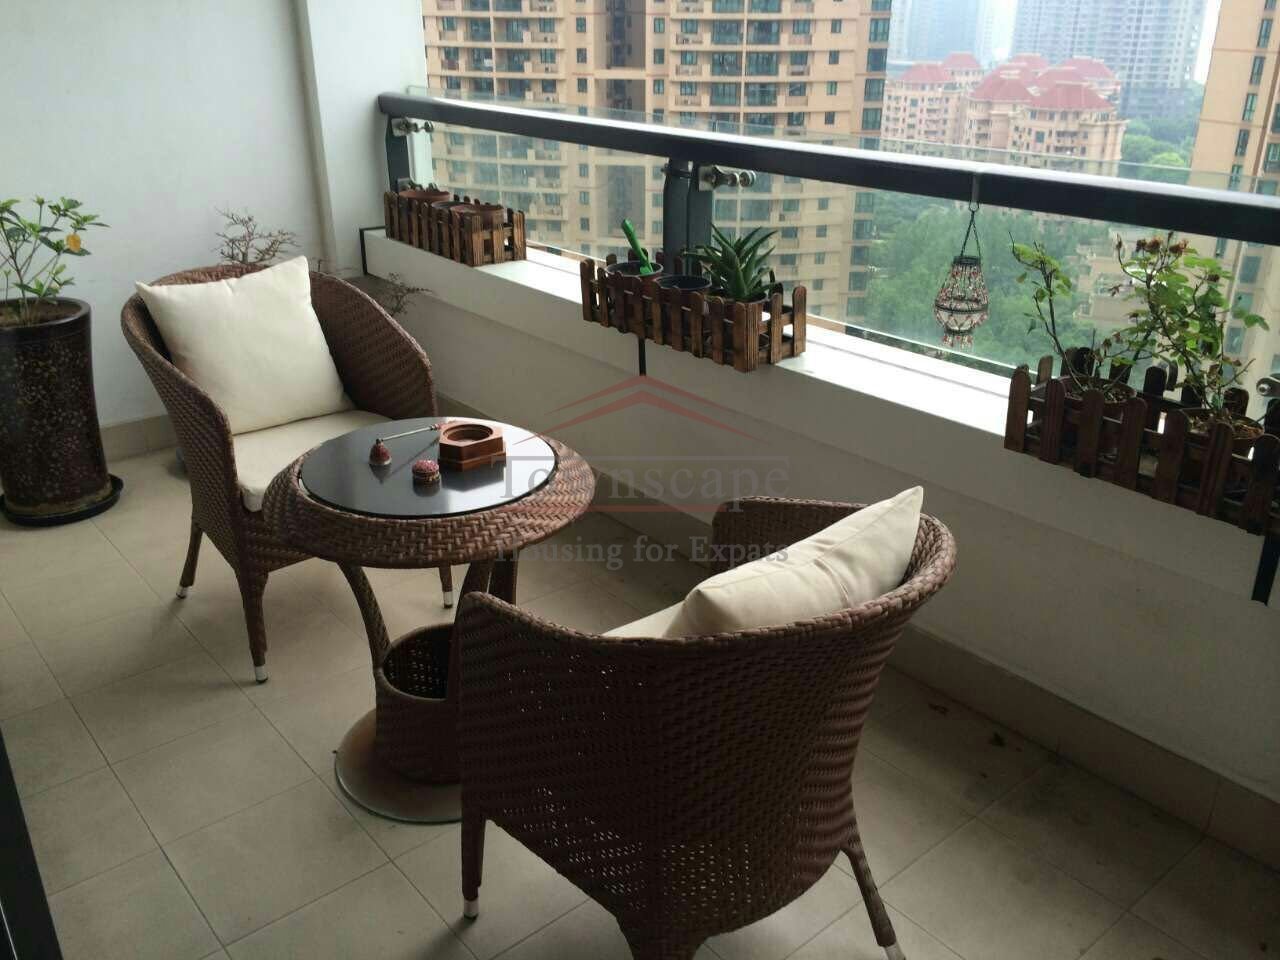 Best place to live in Shanghai Large 3 BR Apartment in exclusive Skyline mansion Pudong